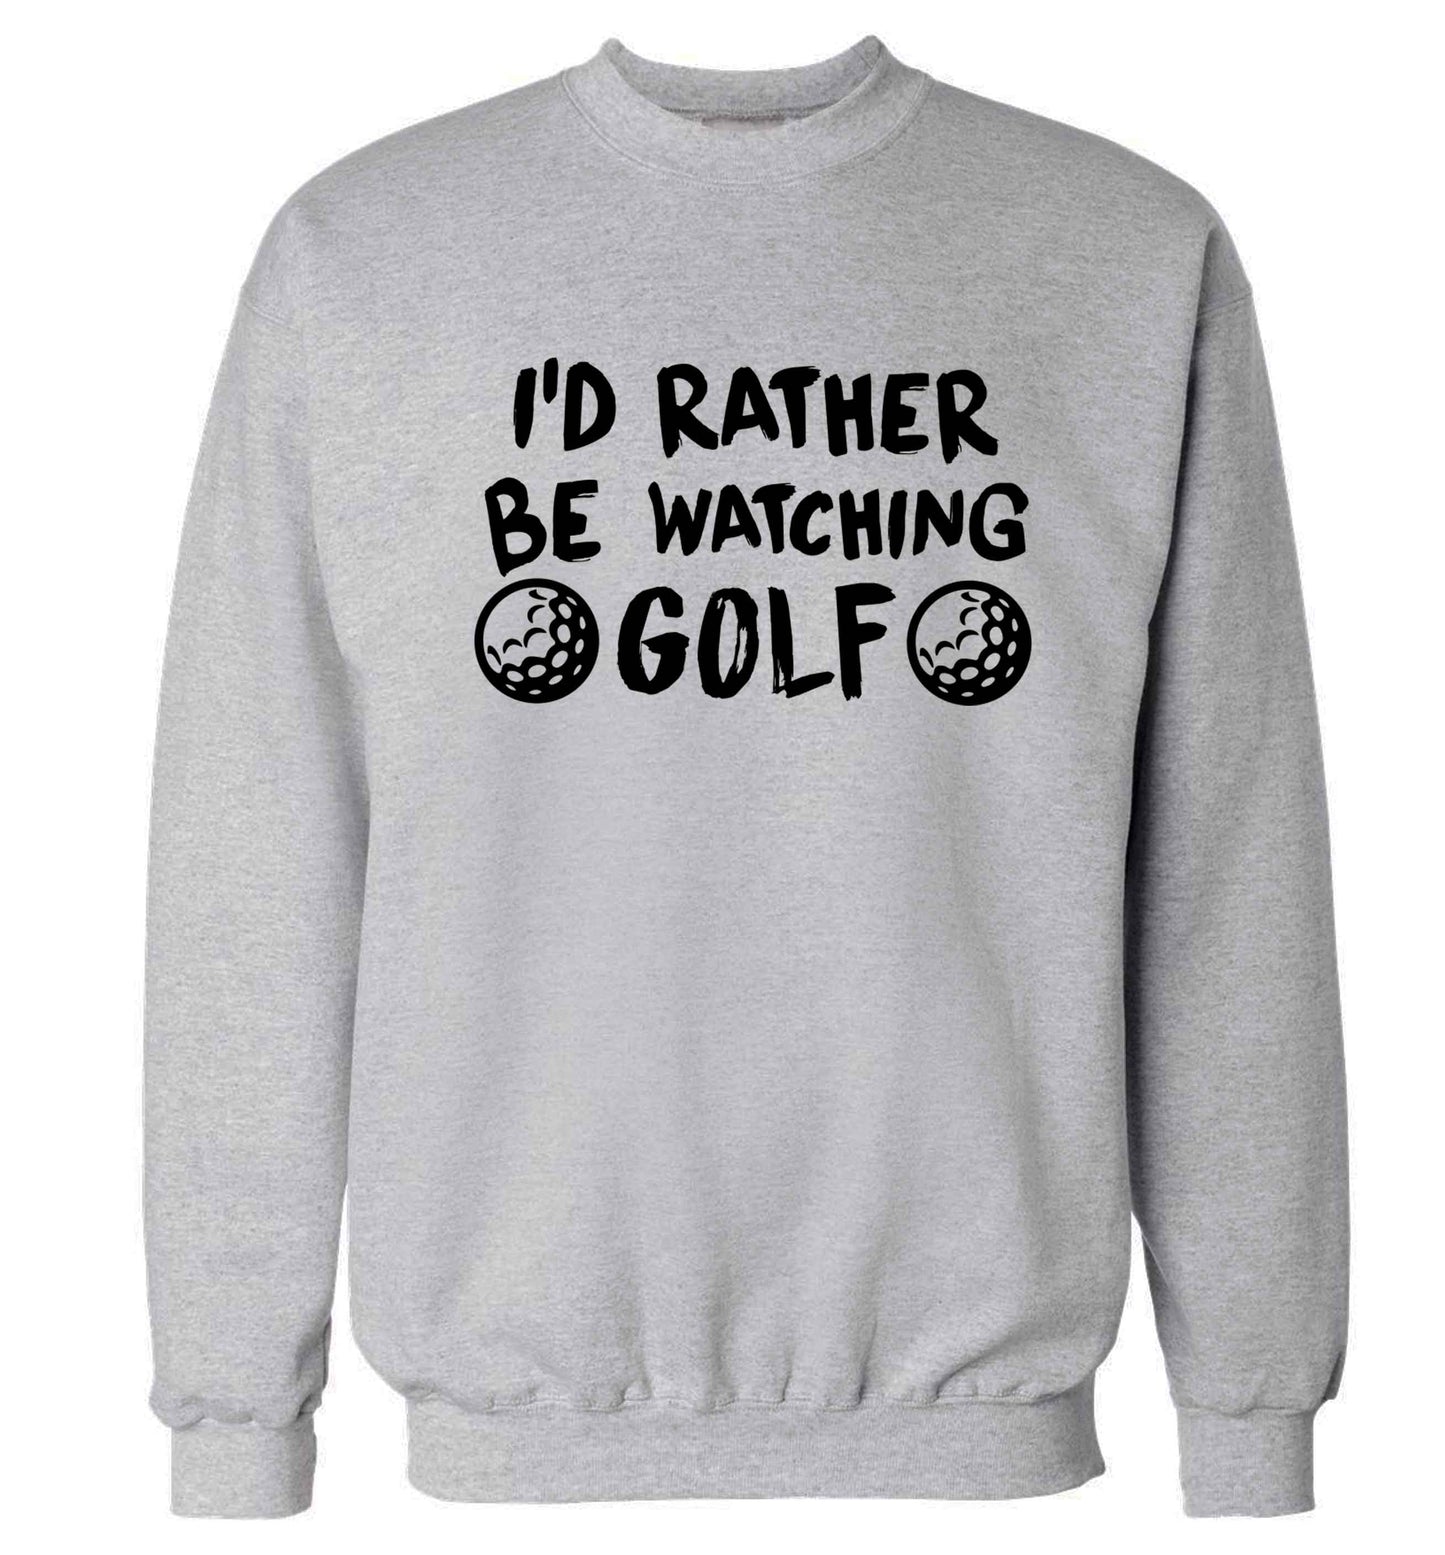 I'd rather be watching golf Adult's unisex grey Sweater 2XL